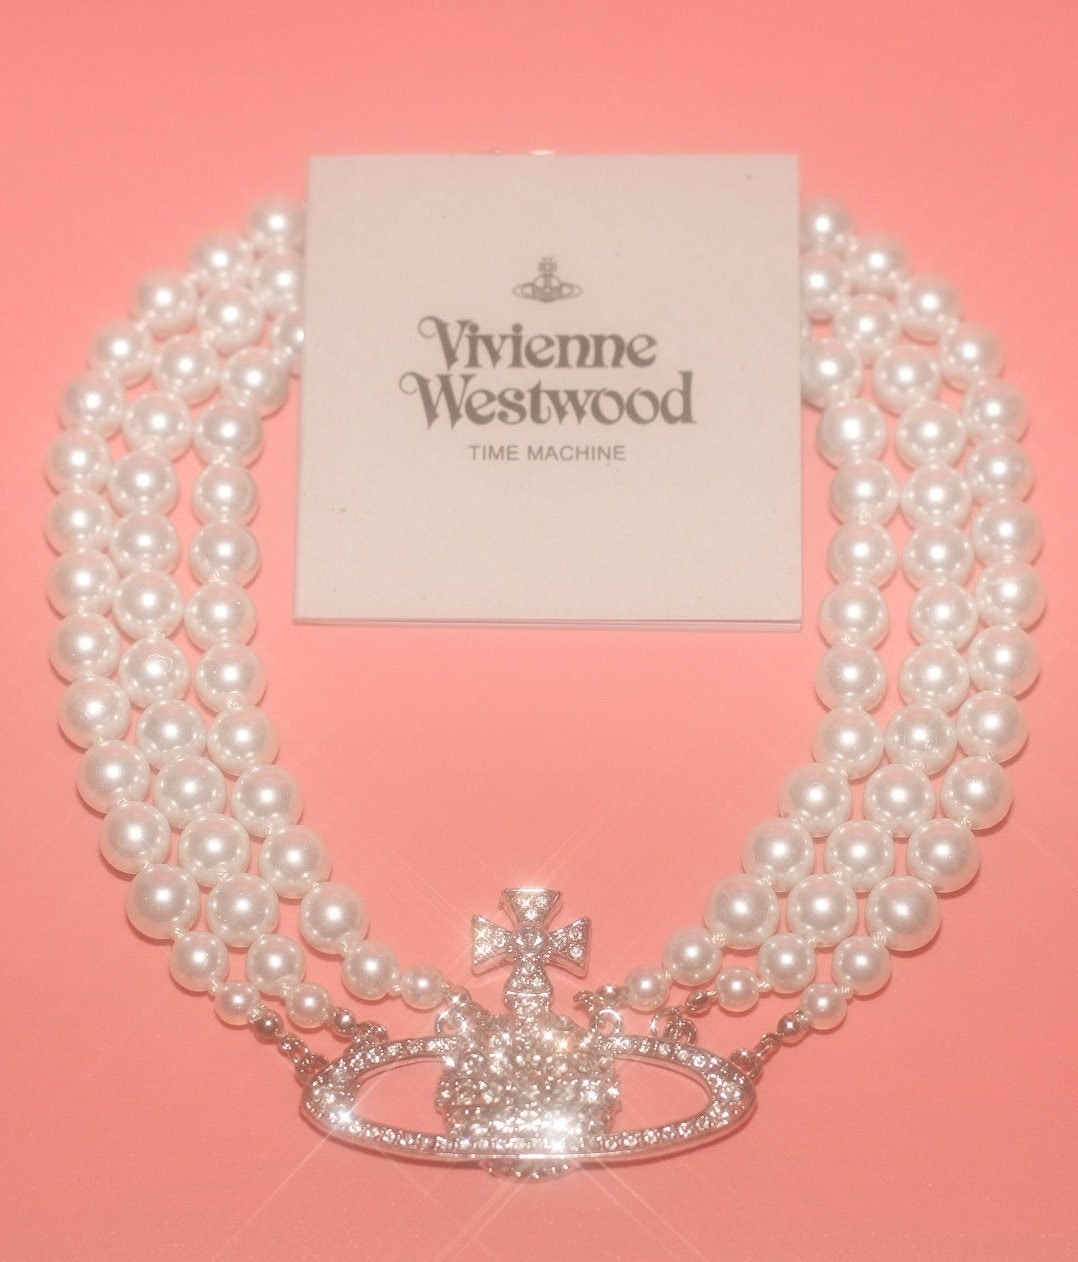 I Purchased My First Vivienne Westwood Necklace! – ESMESHA